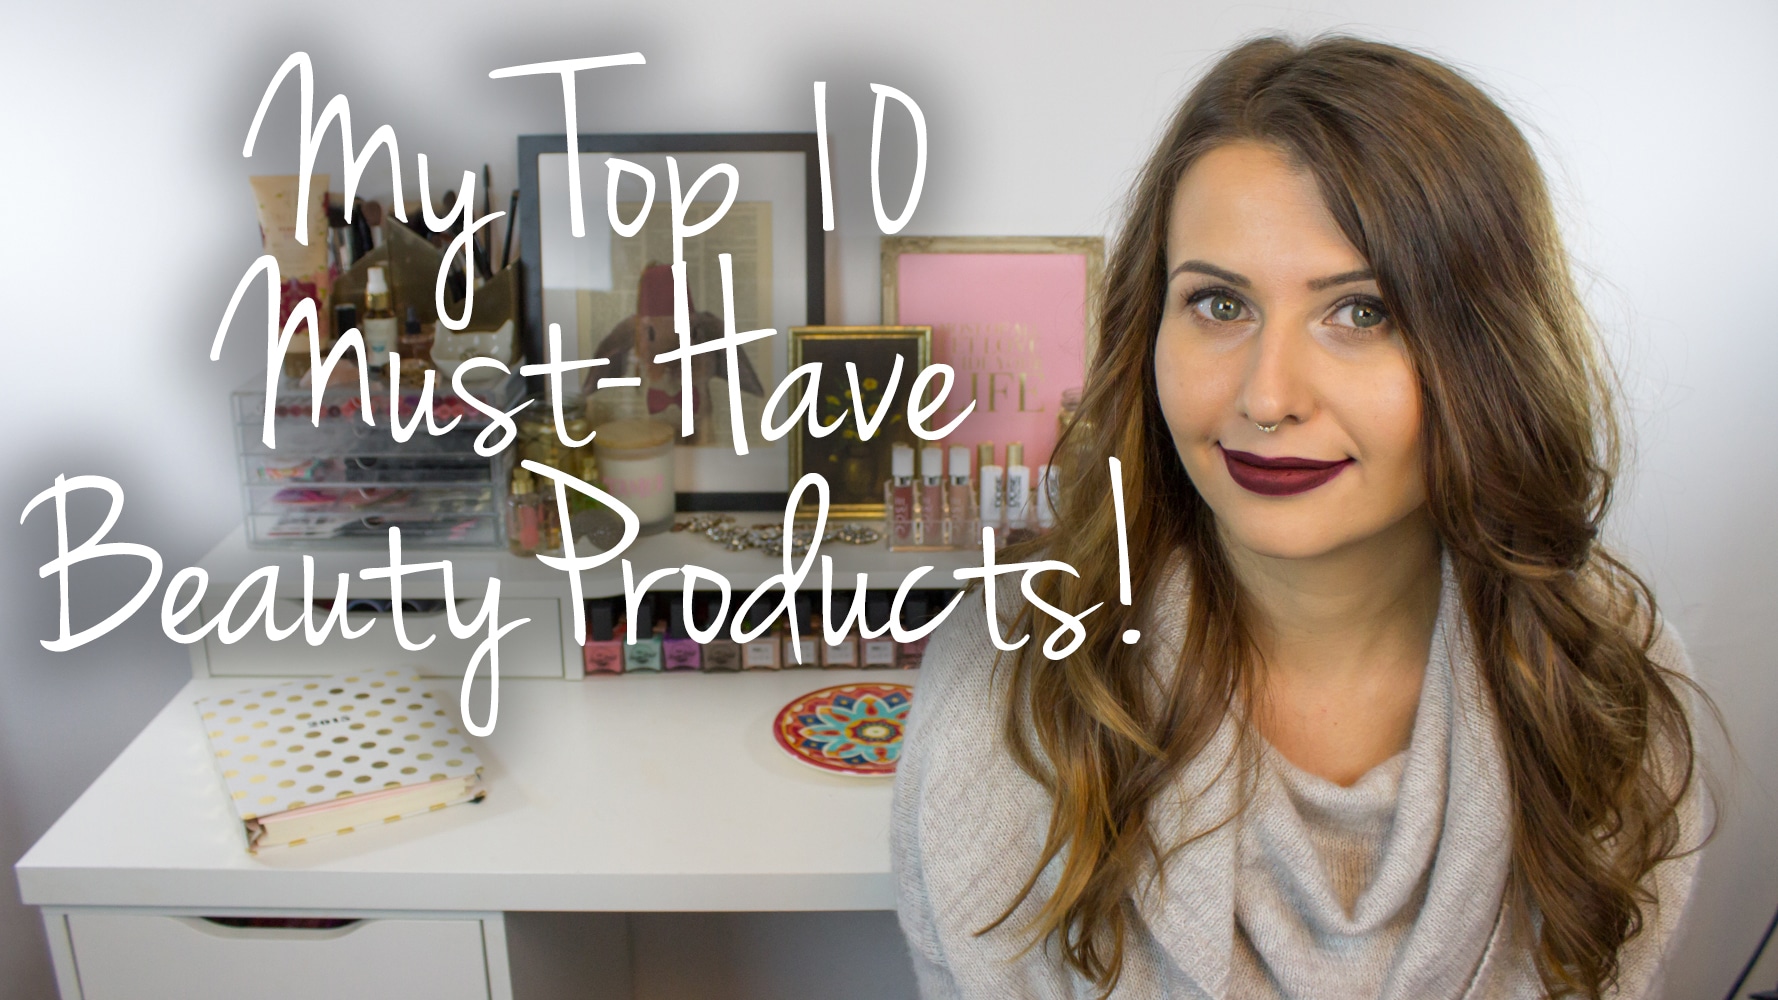 Top 10 Must-Have Cruelty Free & Vegan Beauty Faves Tag Video